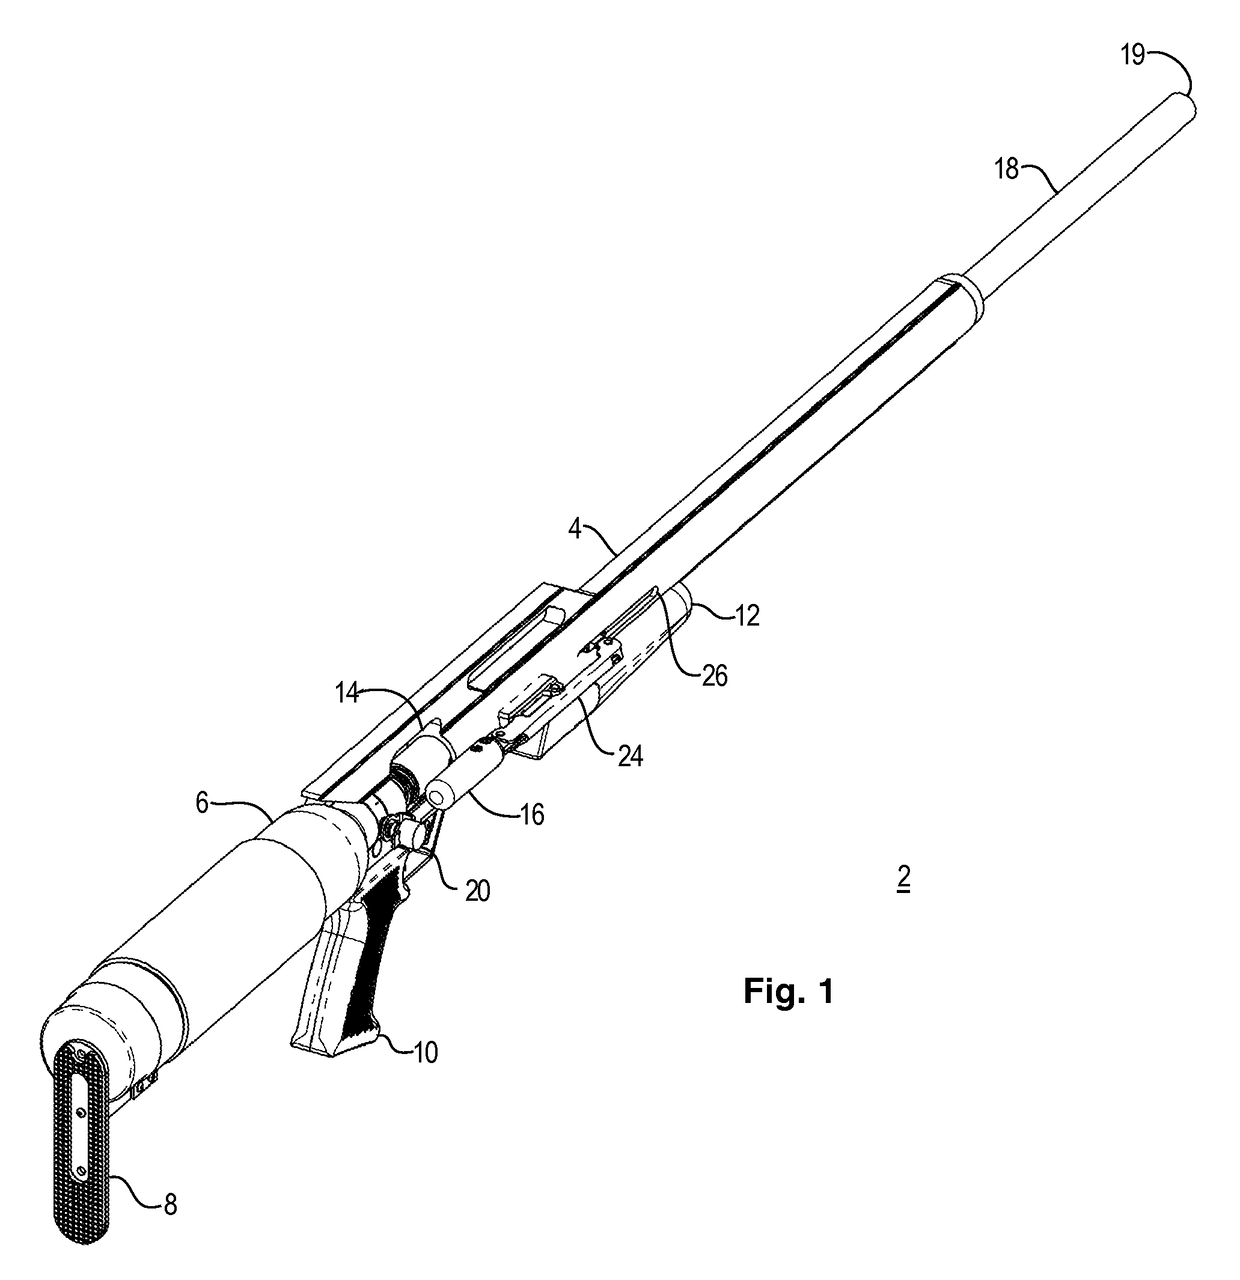 Compressed gas gun with improved operating mechanism